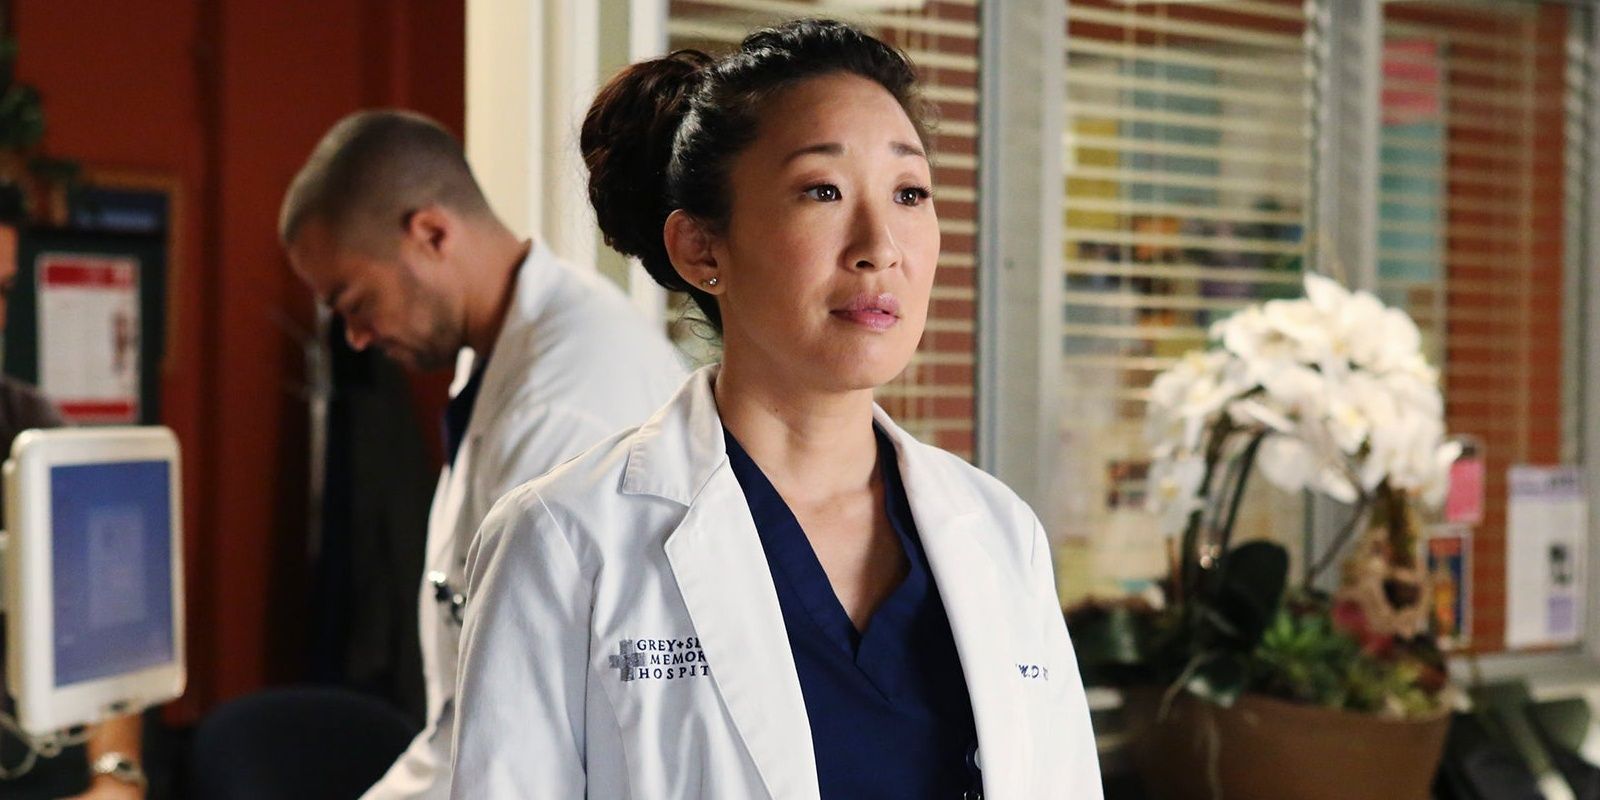 Cristina Yang steps out of the OR after performing surgery on Cris in Grey's Anatomy